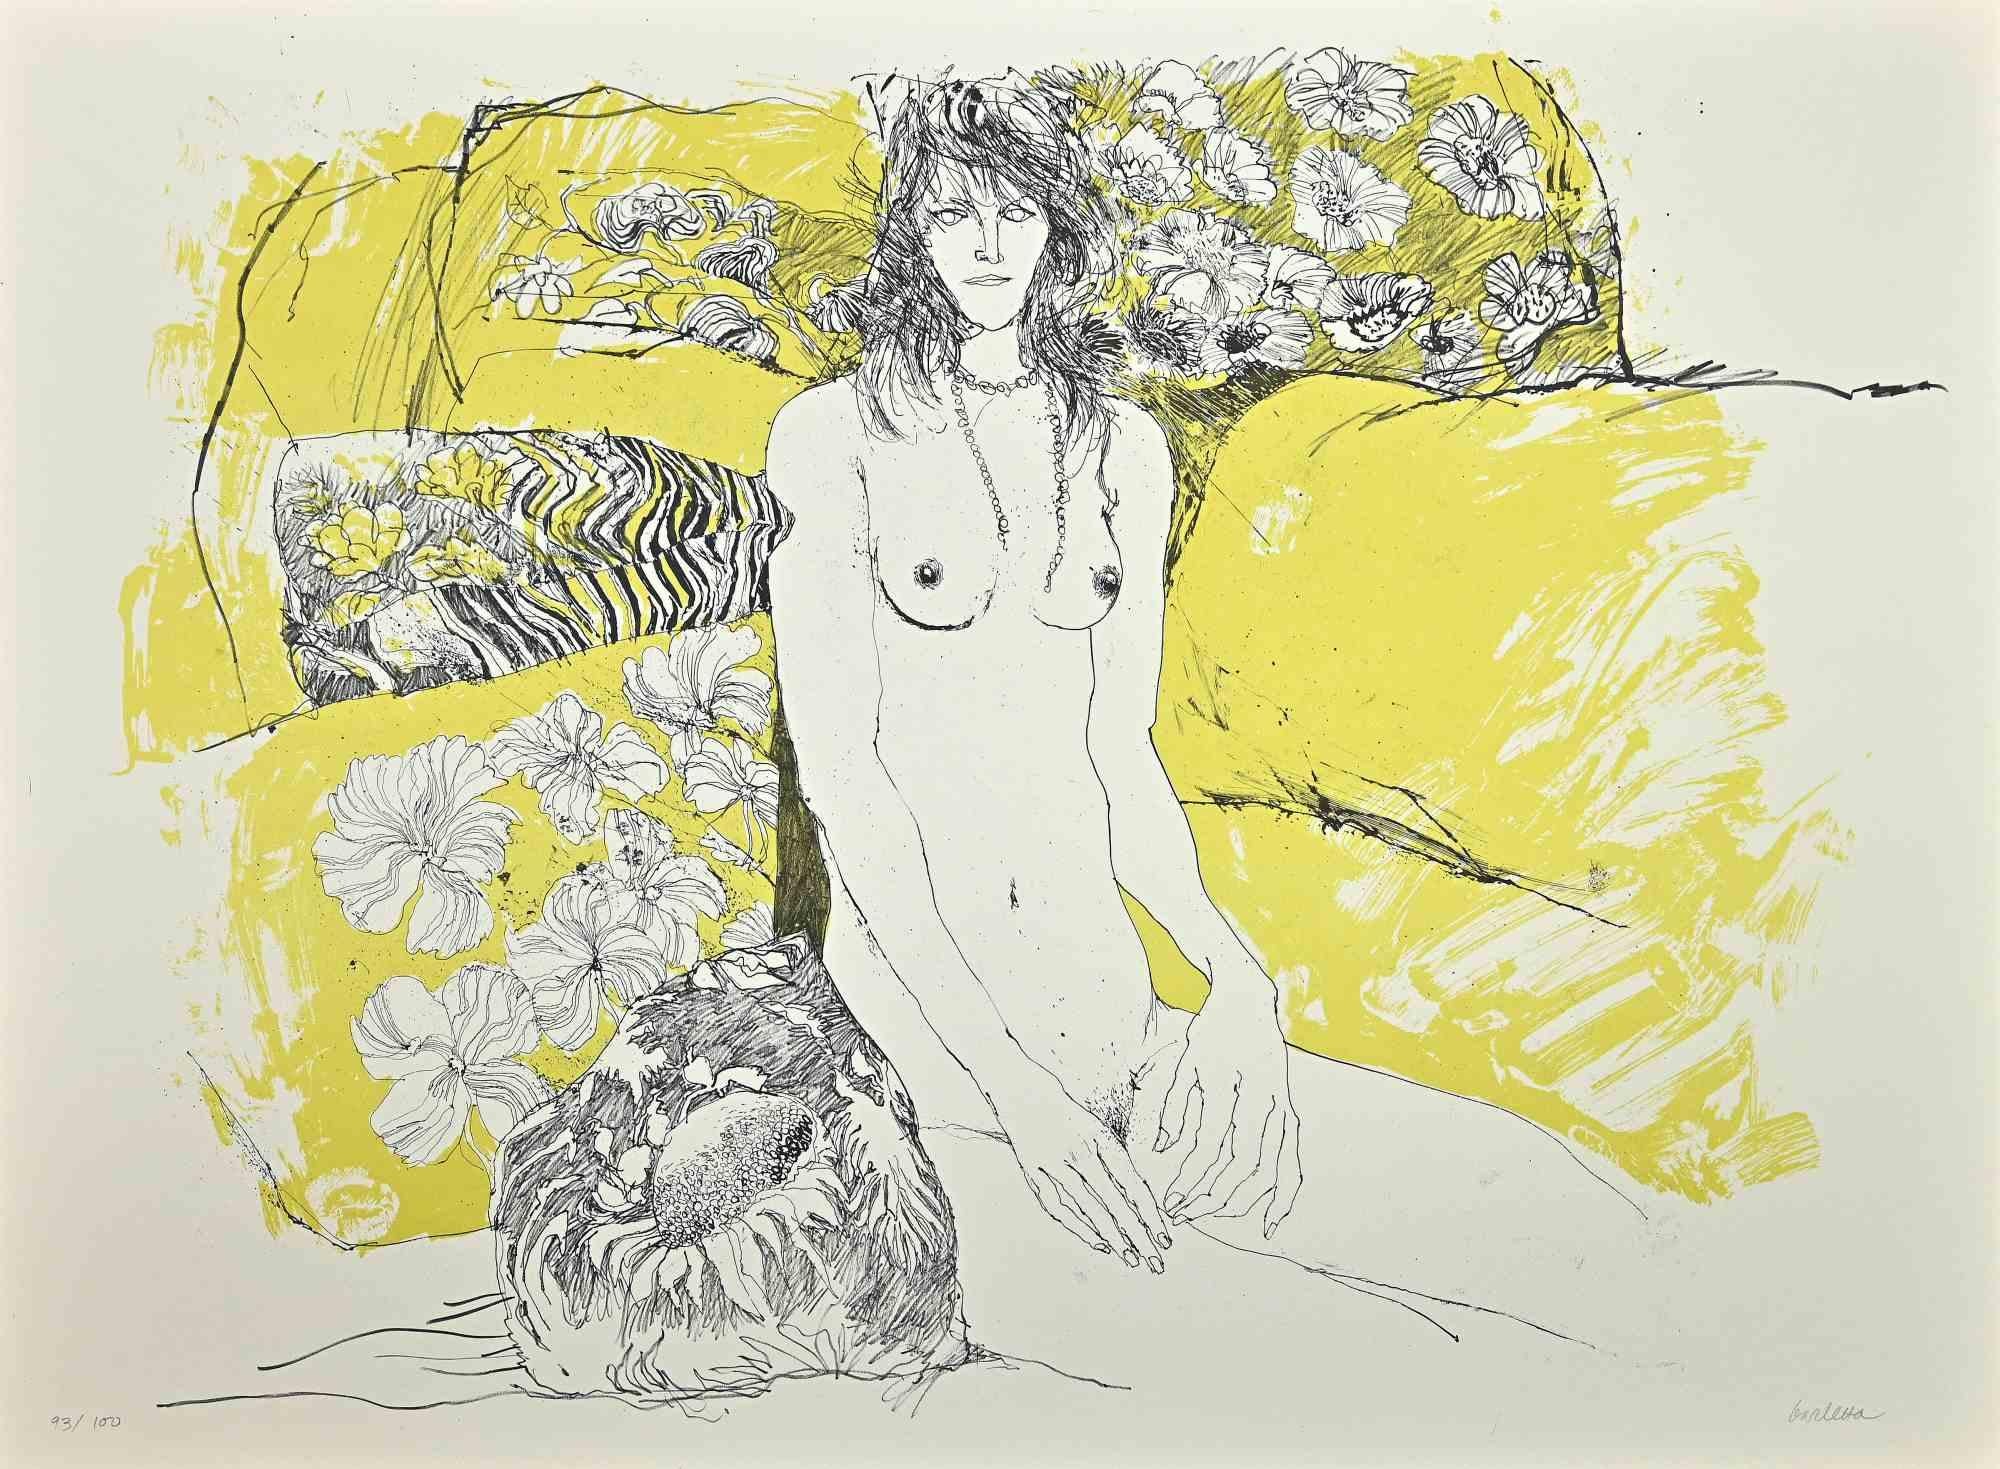 Nude is a lithograph a on paper realized in 1980s by Sergio Barletta. Hand-signed on the lower right in pencil. From the edition of 100 prints. Numbered in pencil on the lower left. In good condition.

Sergio Barletta  (1934) is an Italian